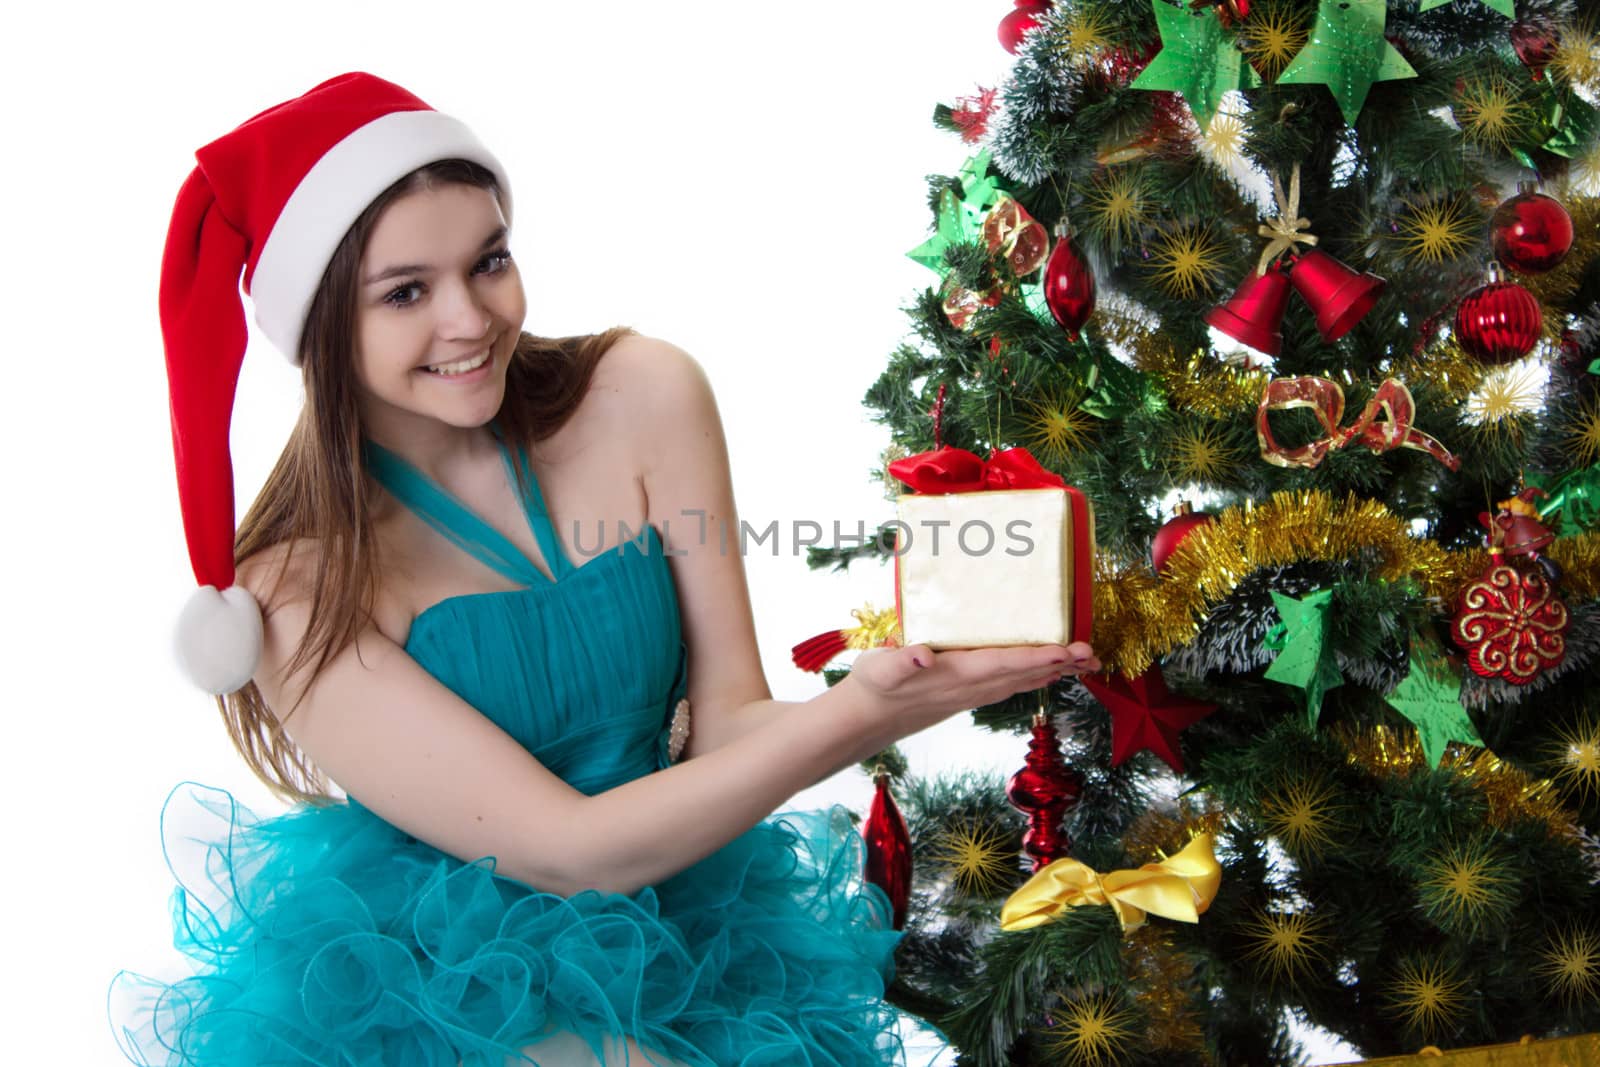 Smiling teenage girl in Santa hat offering present under Christmas tree over white